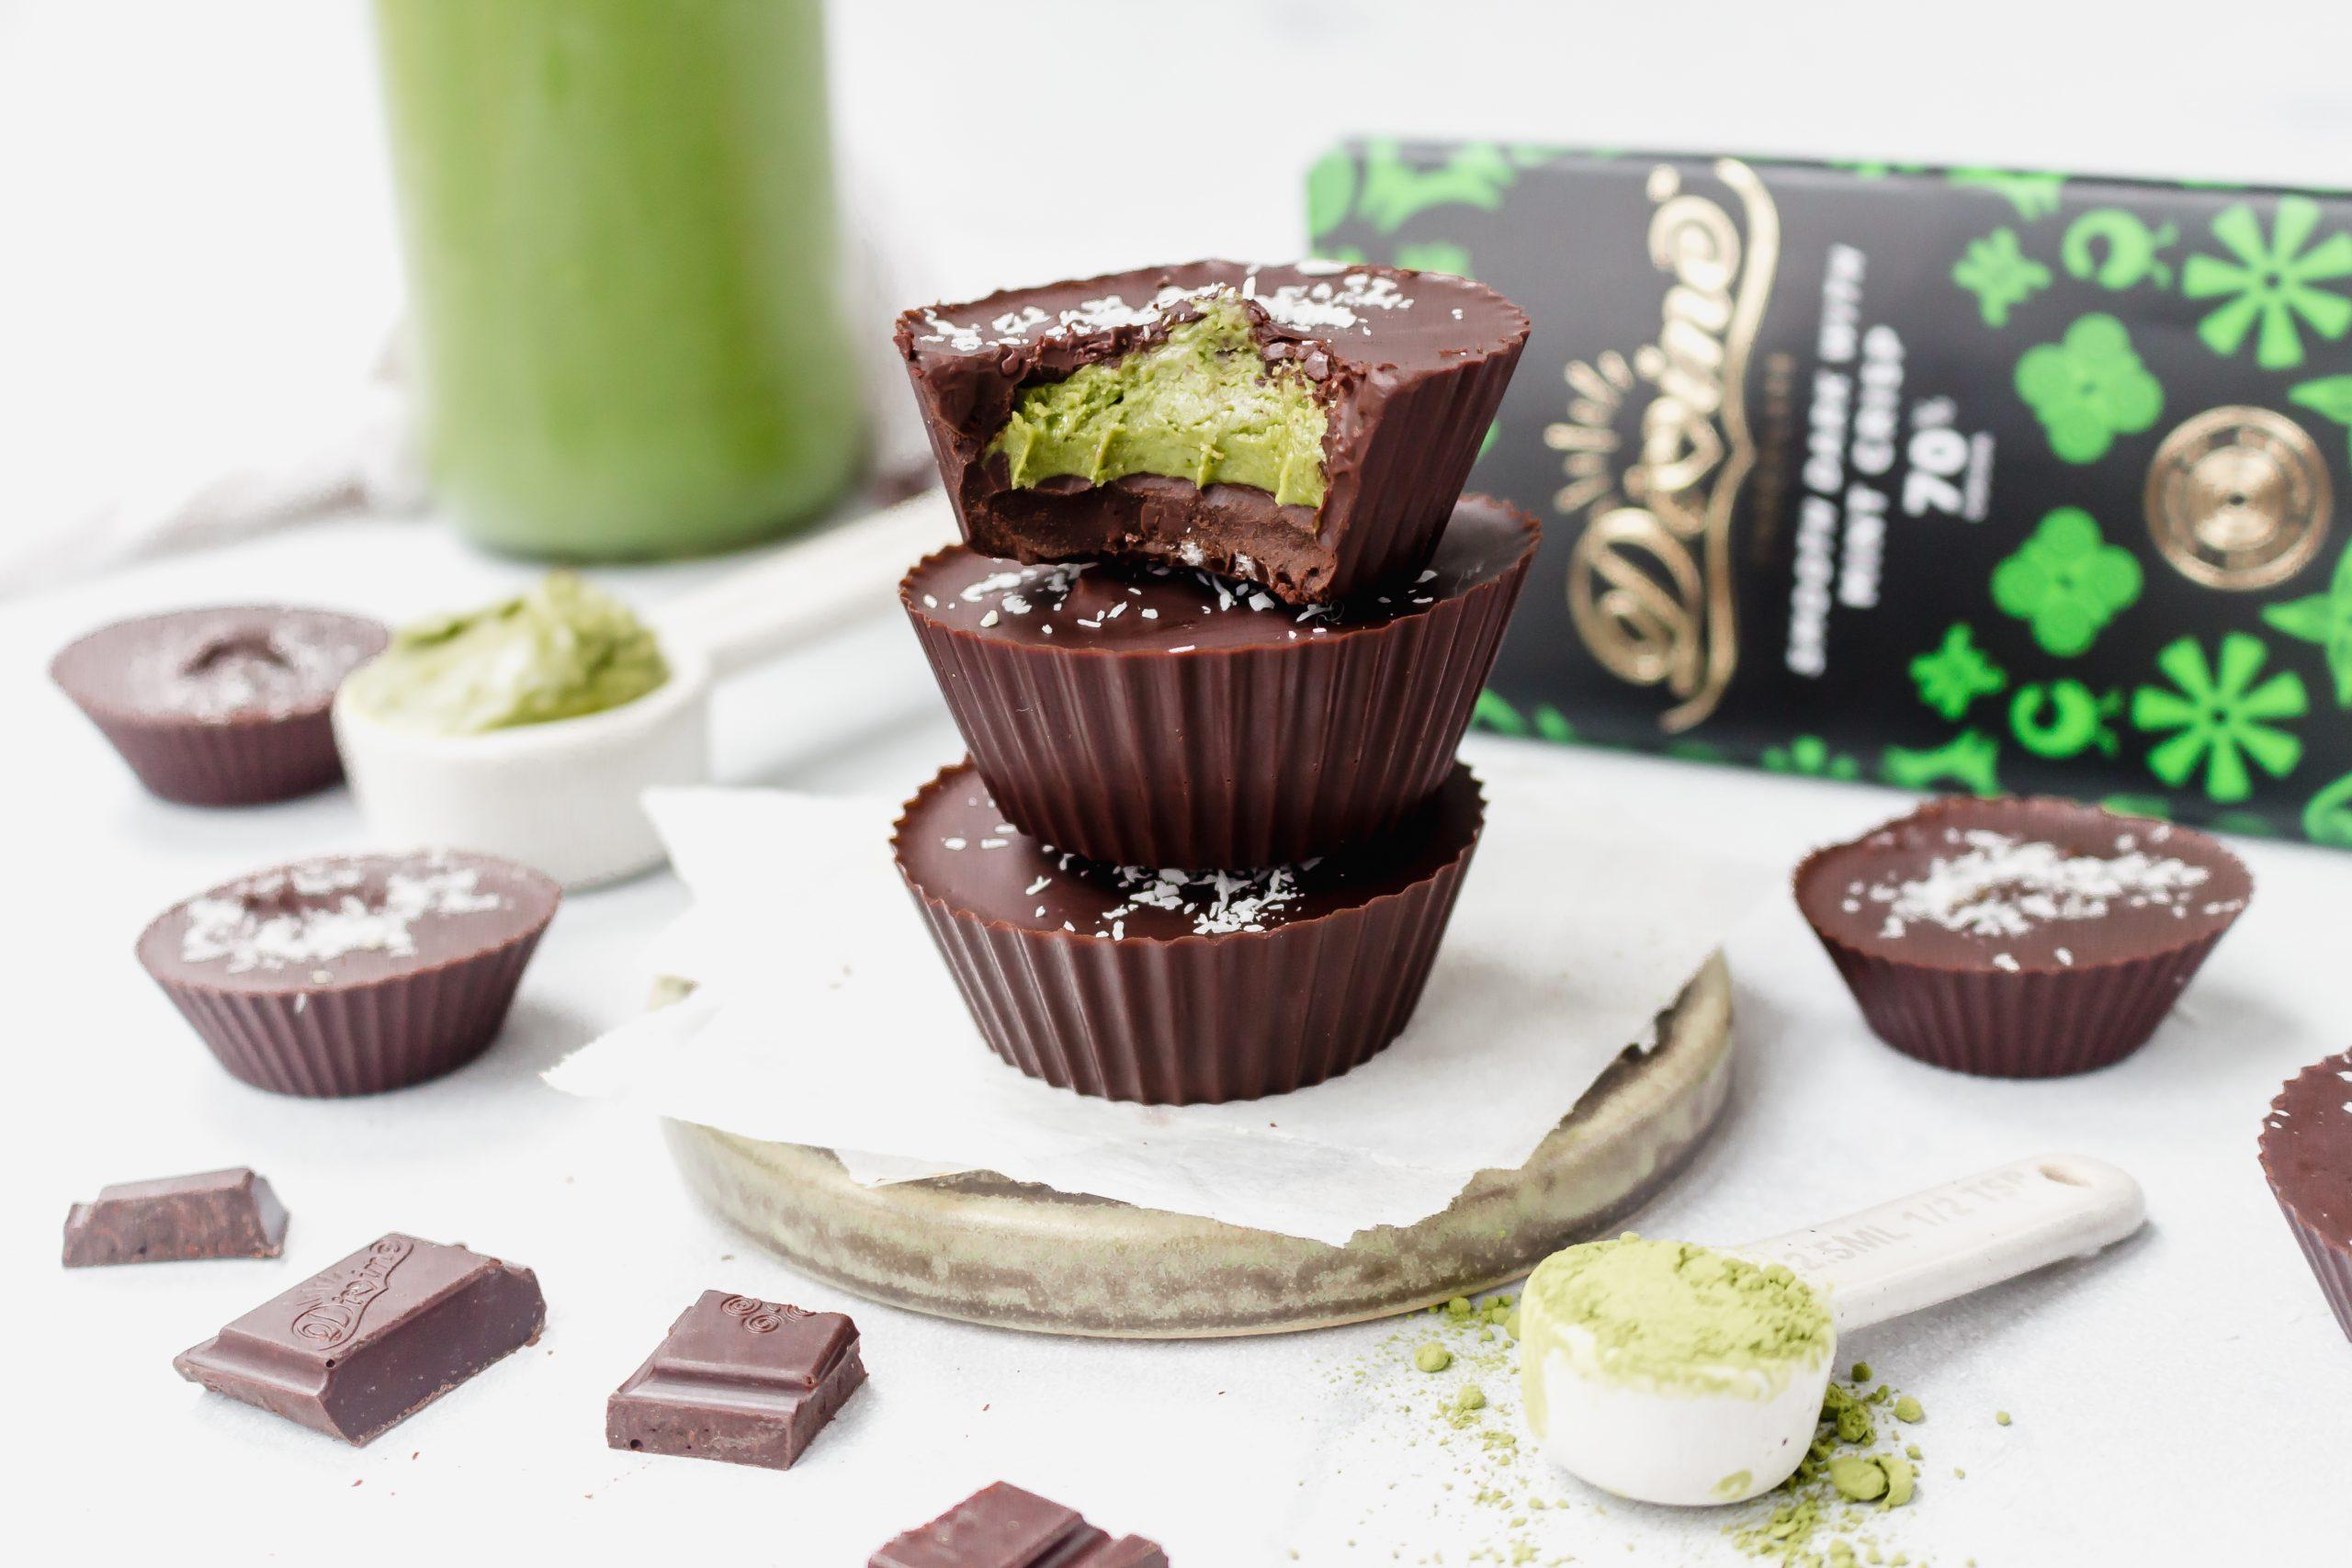 Minty Matcha Chocolate Nut Butter Cups